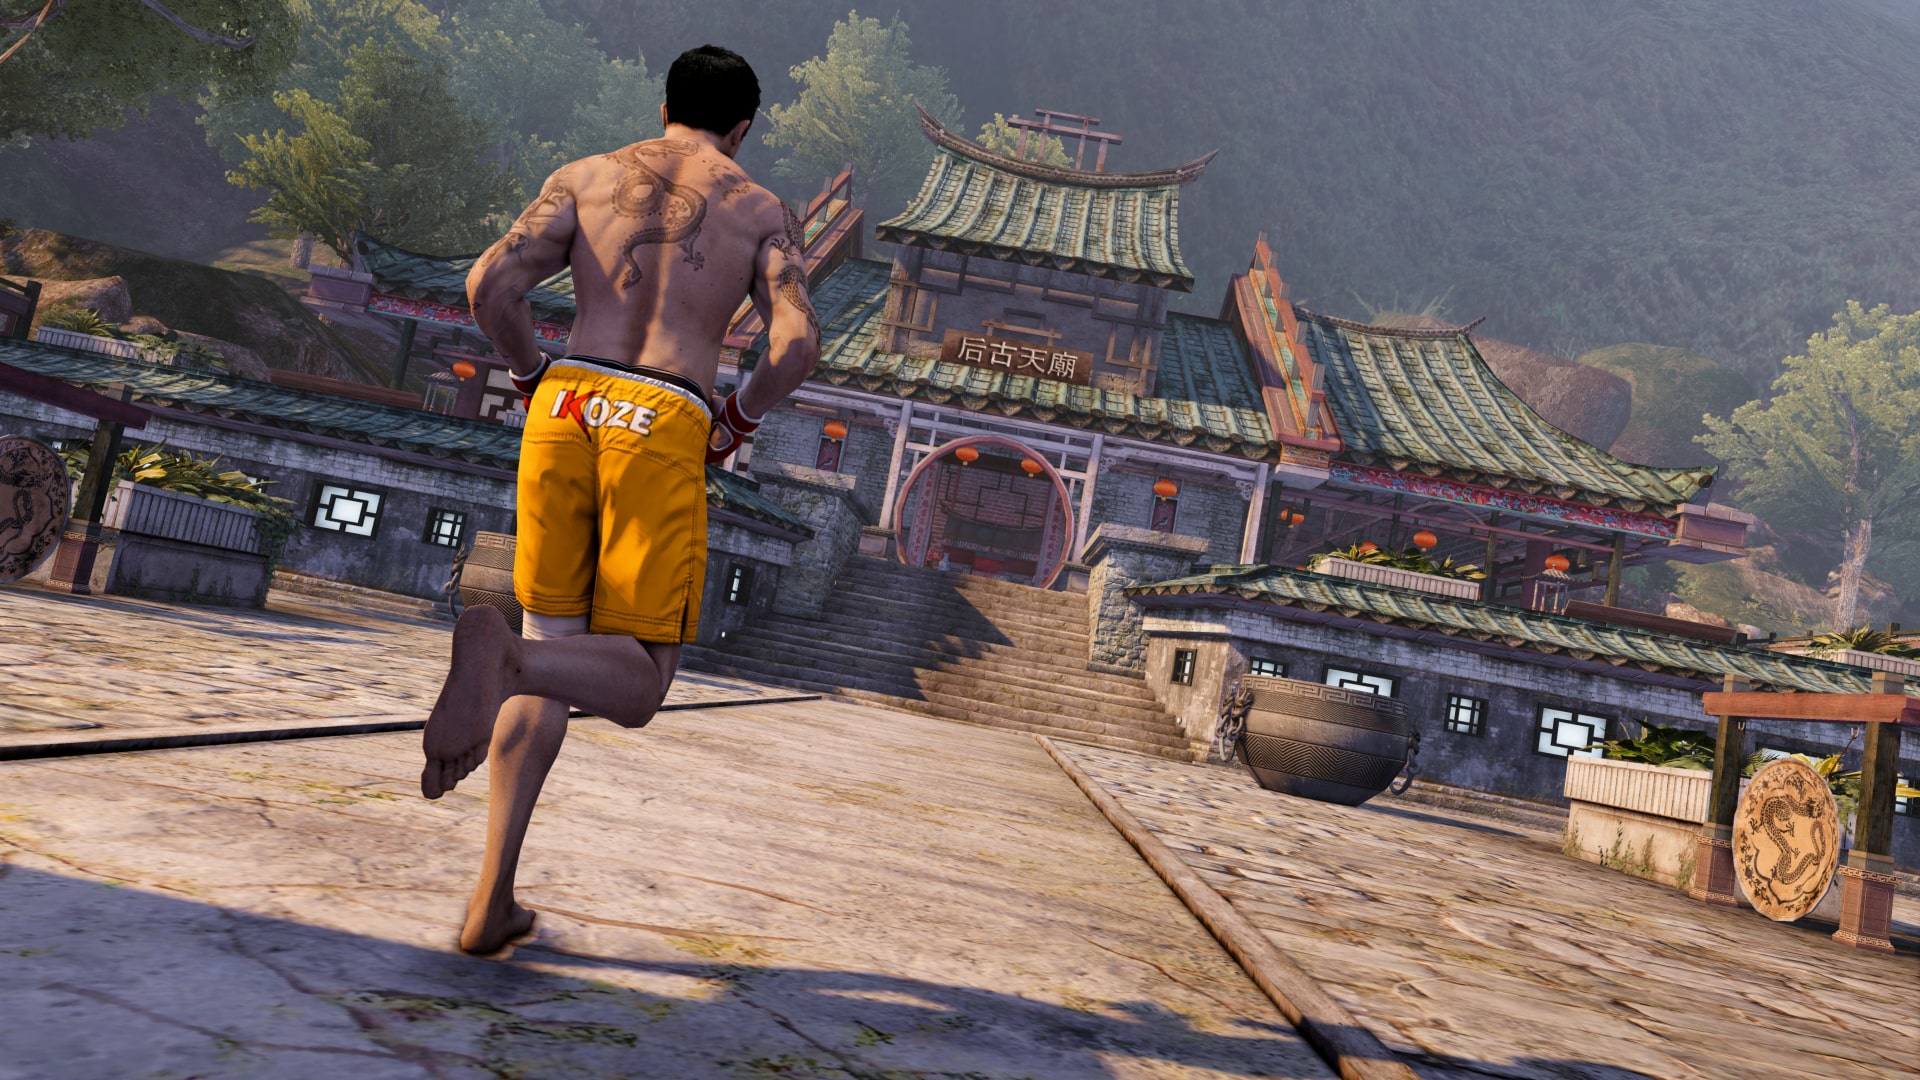 sleeping dogs images